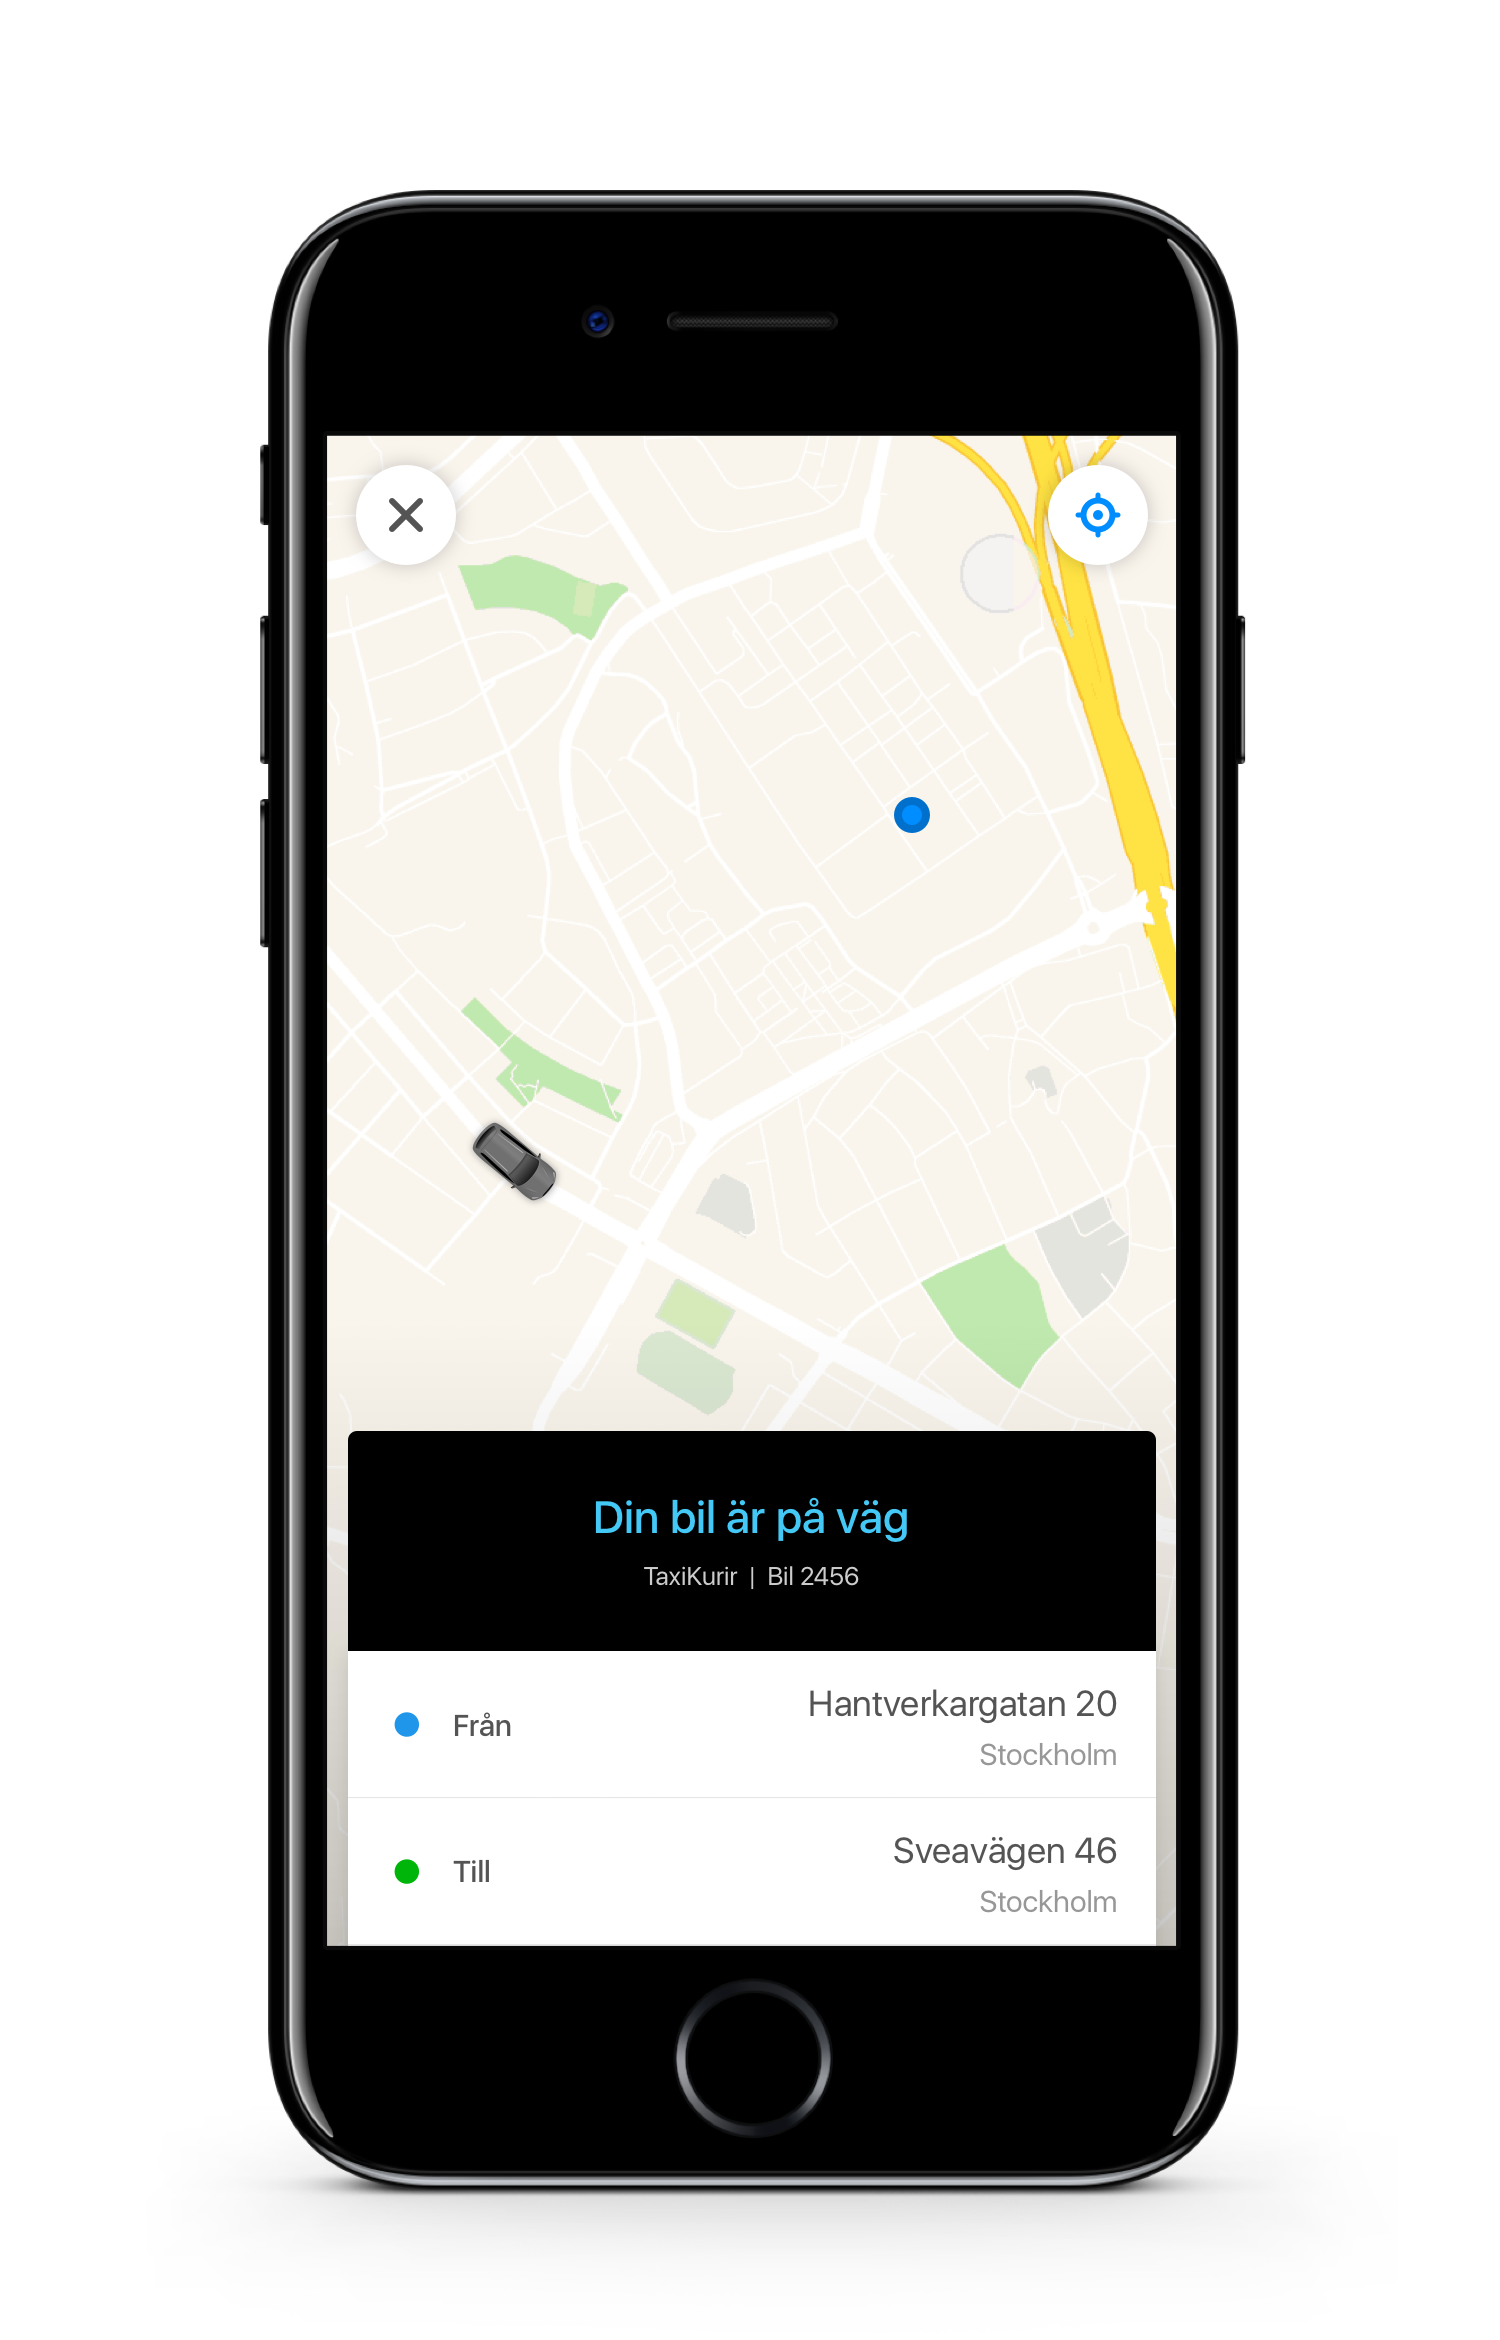 Your car is on its way on a map in the app